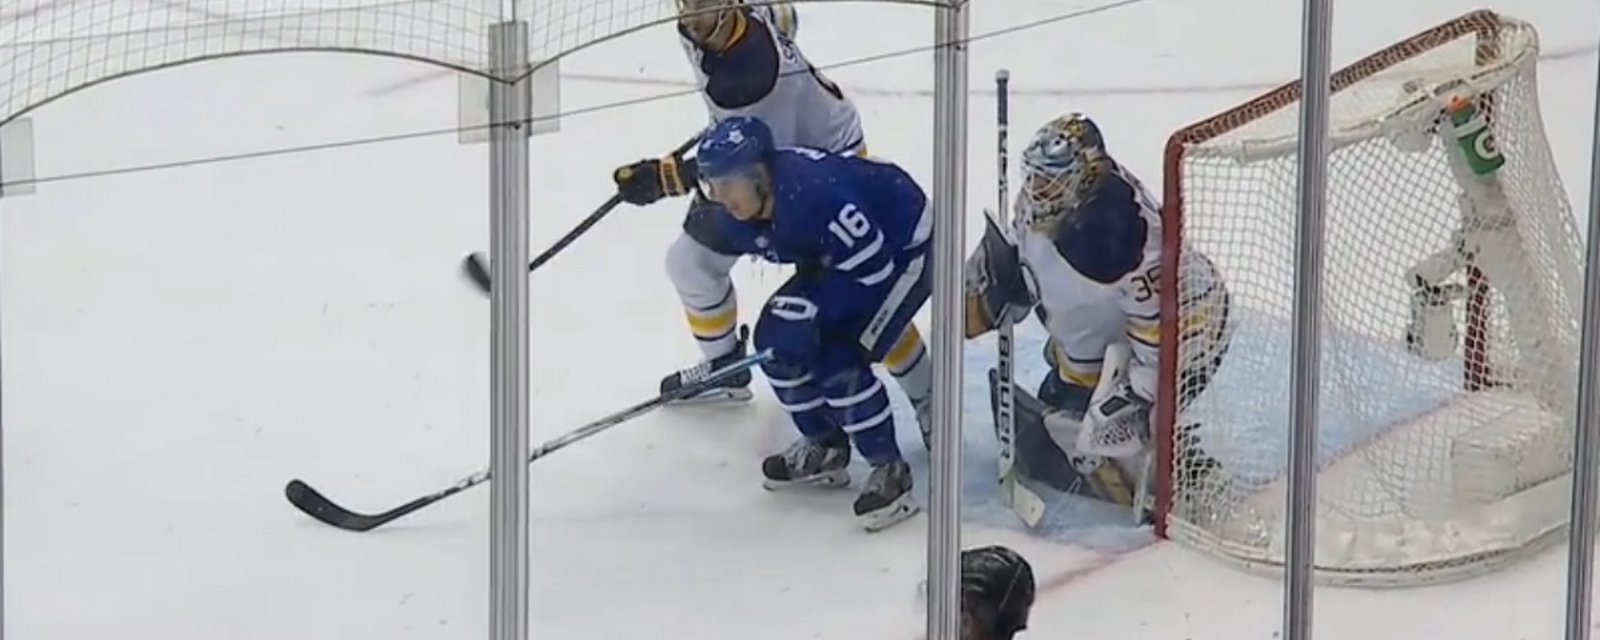 Marner gets doubled over by a low blow from the goalie!